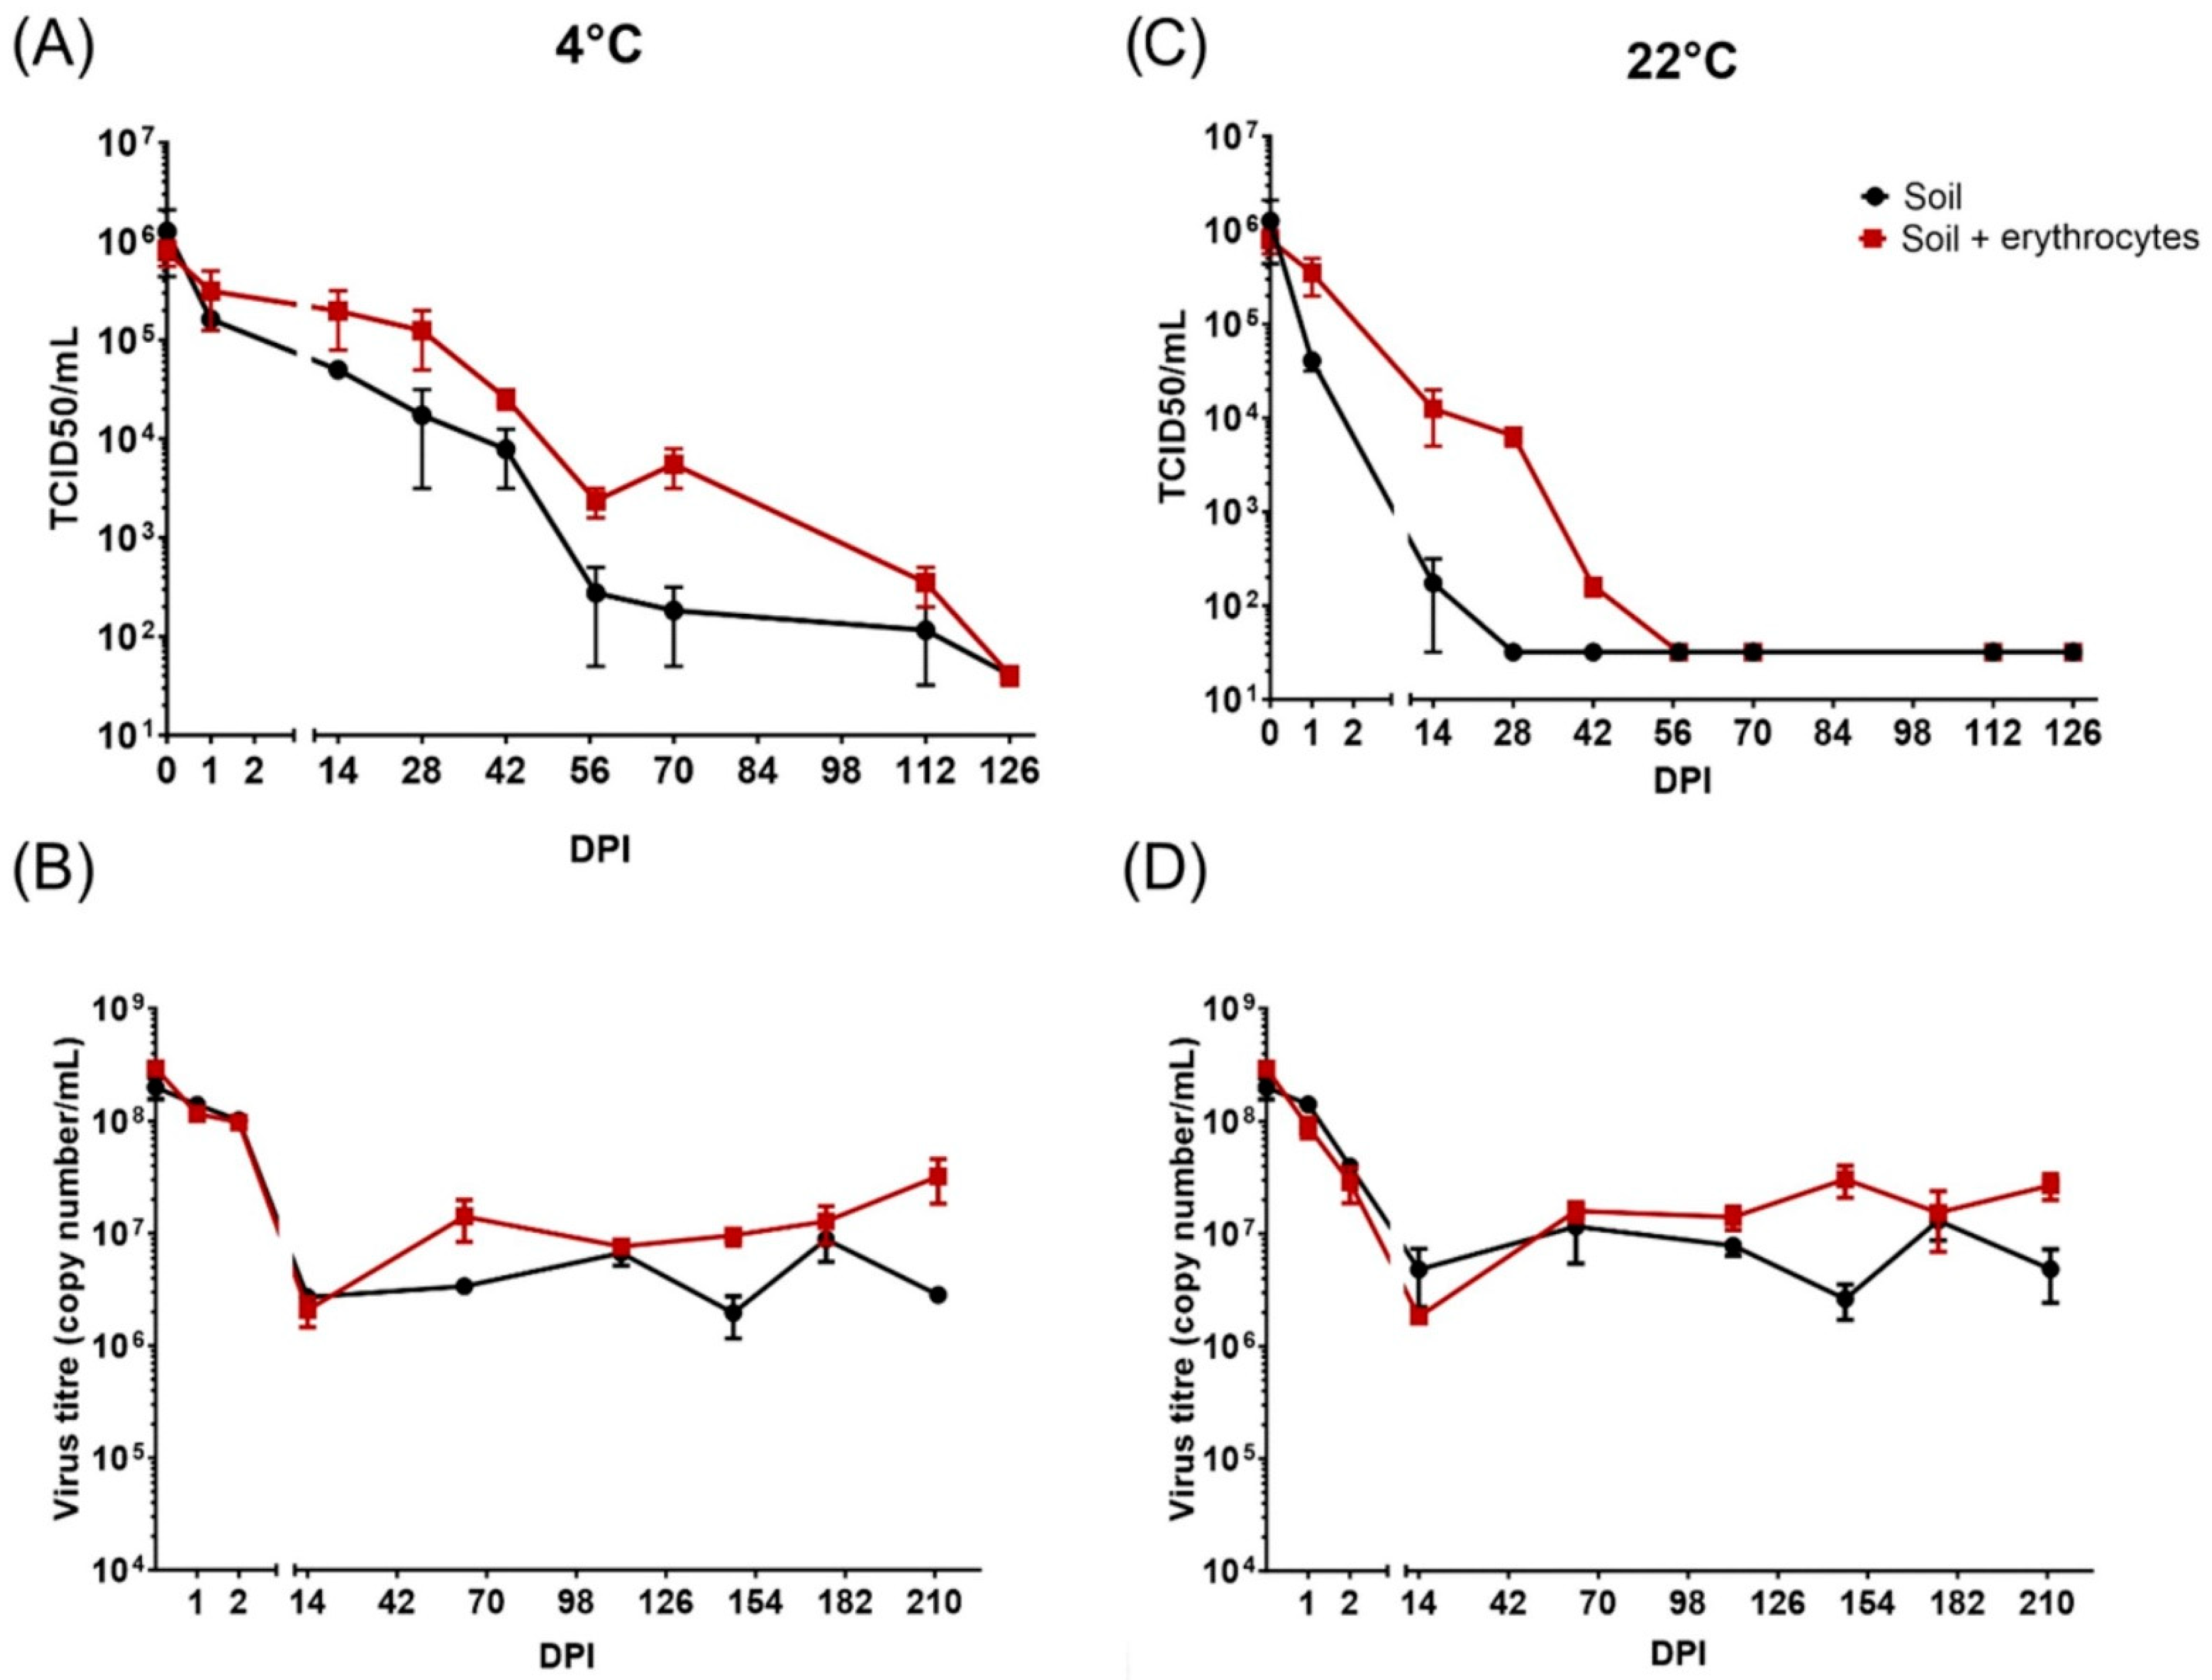 Pathogens | Free Full-Text | Experimental Evidence of the Long-Term  Survival of Infective African Swine Fever Virus Strain Ba71V in Soil under  Different Conditions